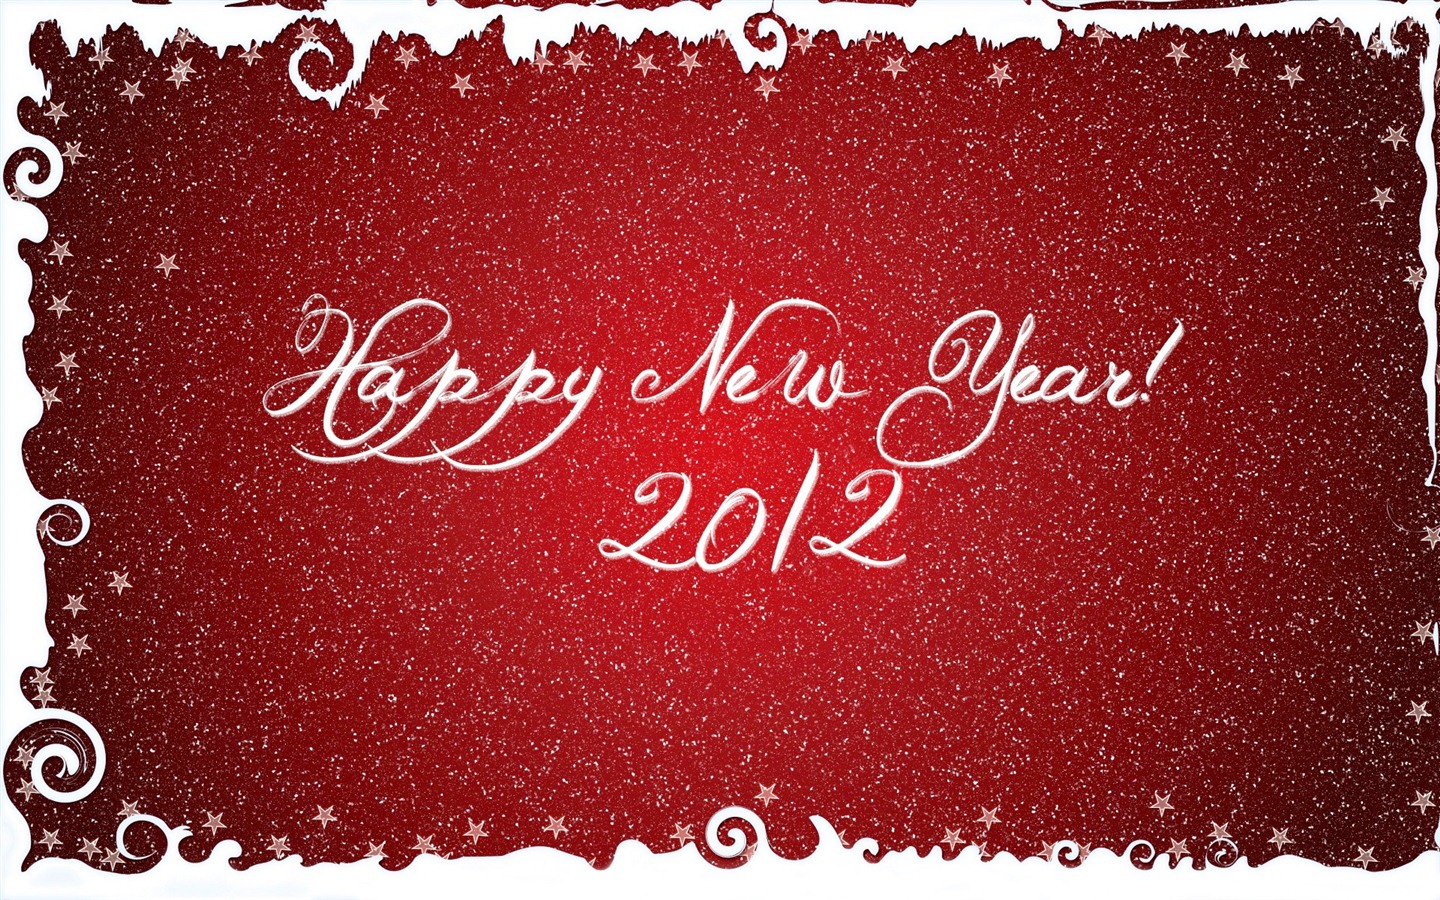 2012 New Year wallpapers (2) #6 - 1440x900